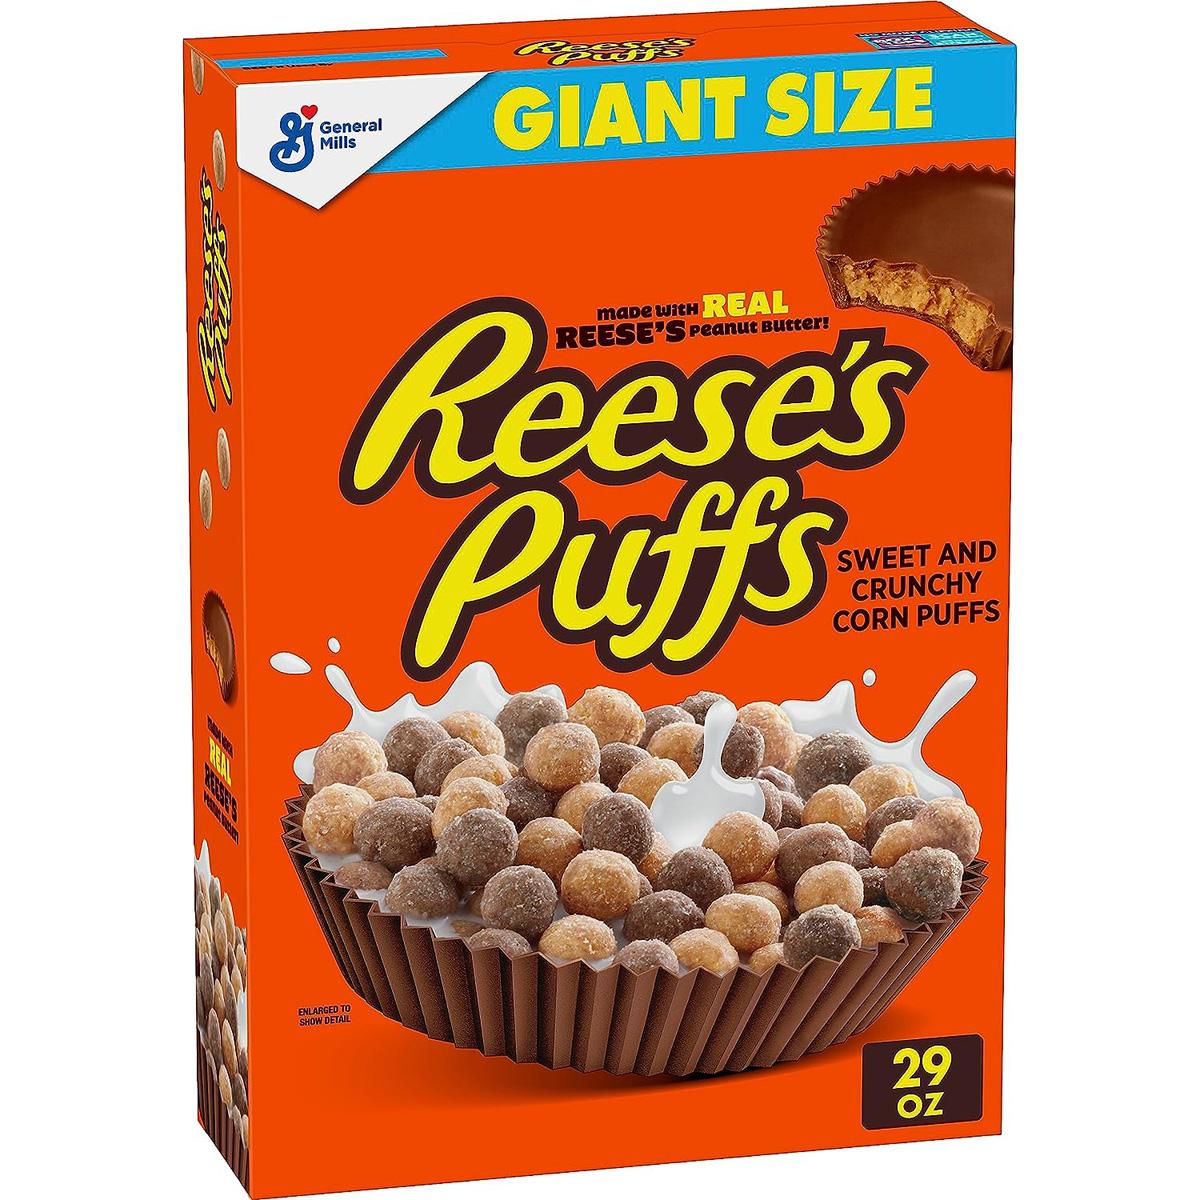 Giant Size Box Reeses Puffs Chocolatey Peanut Butter Cereal for $3.74 Shipped